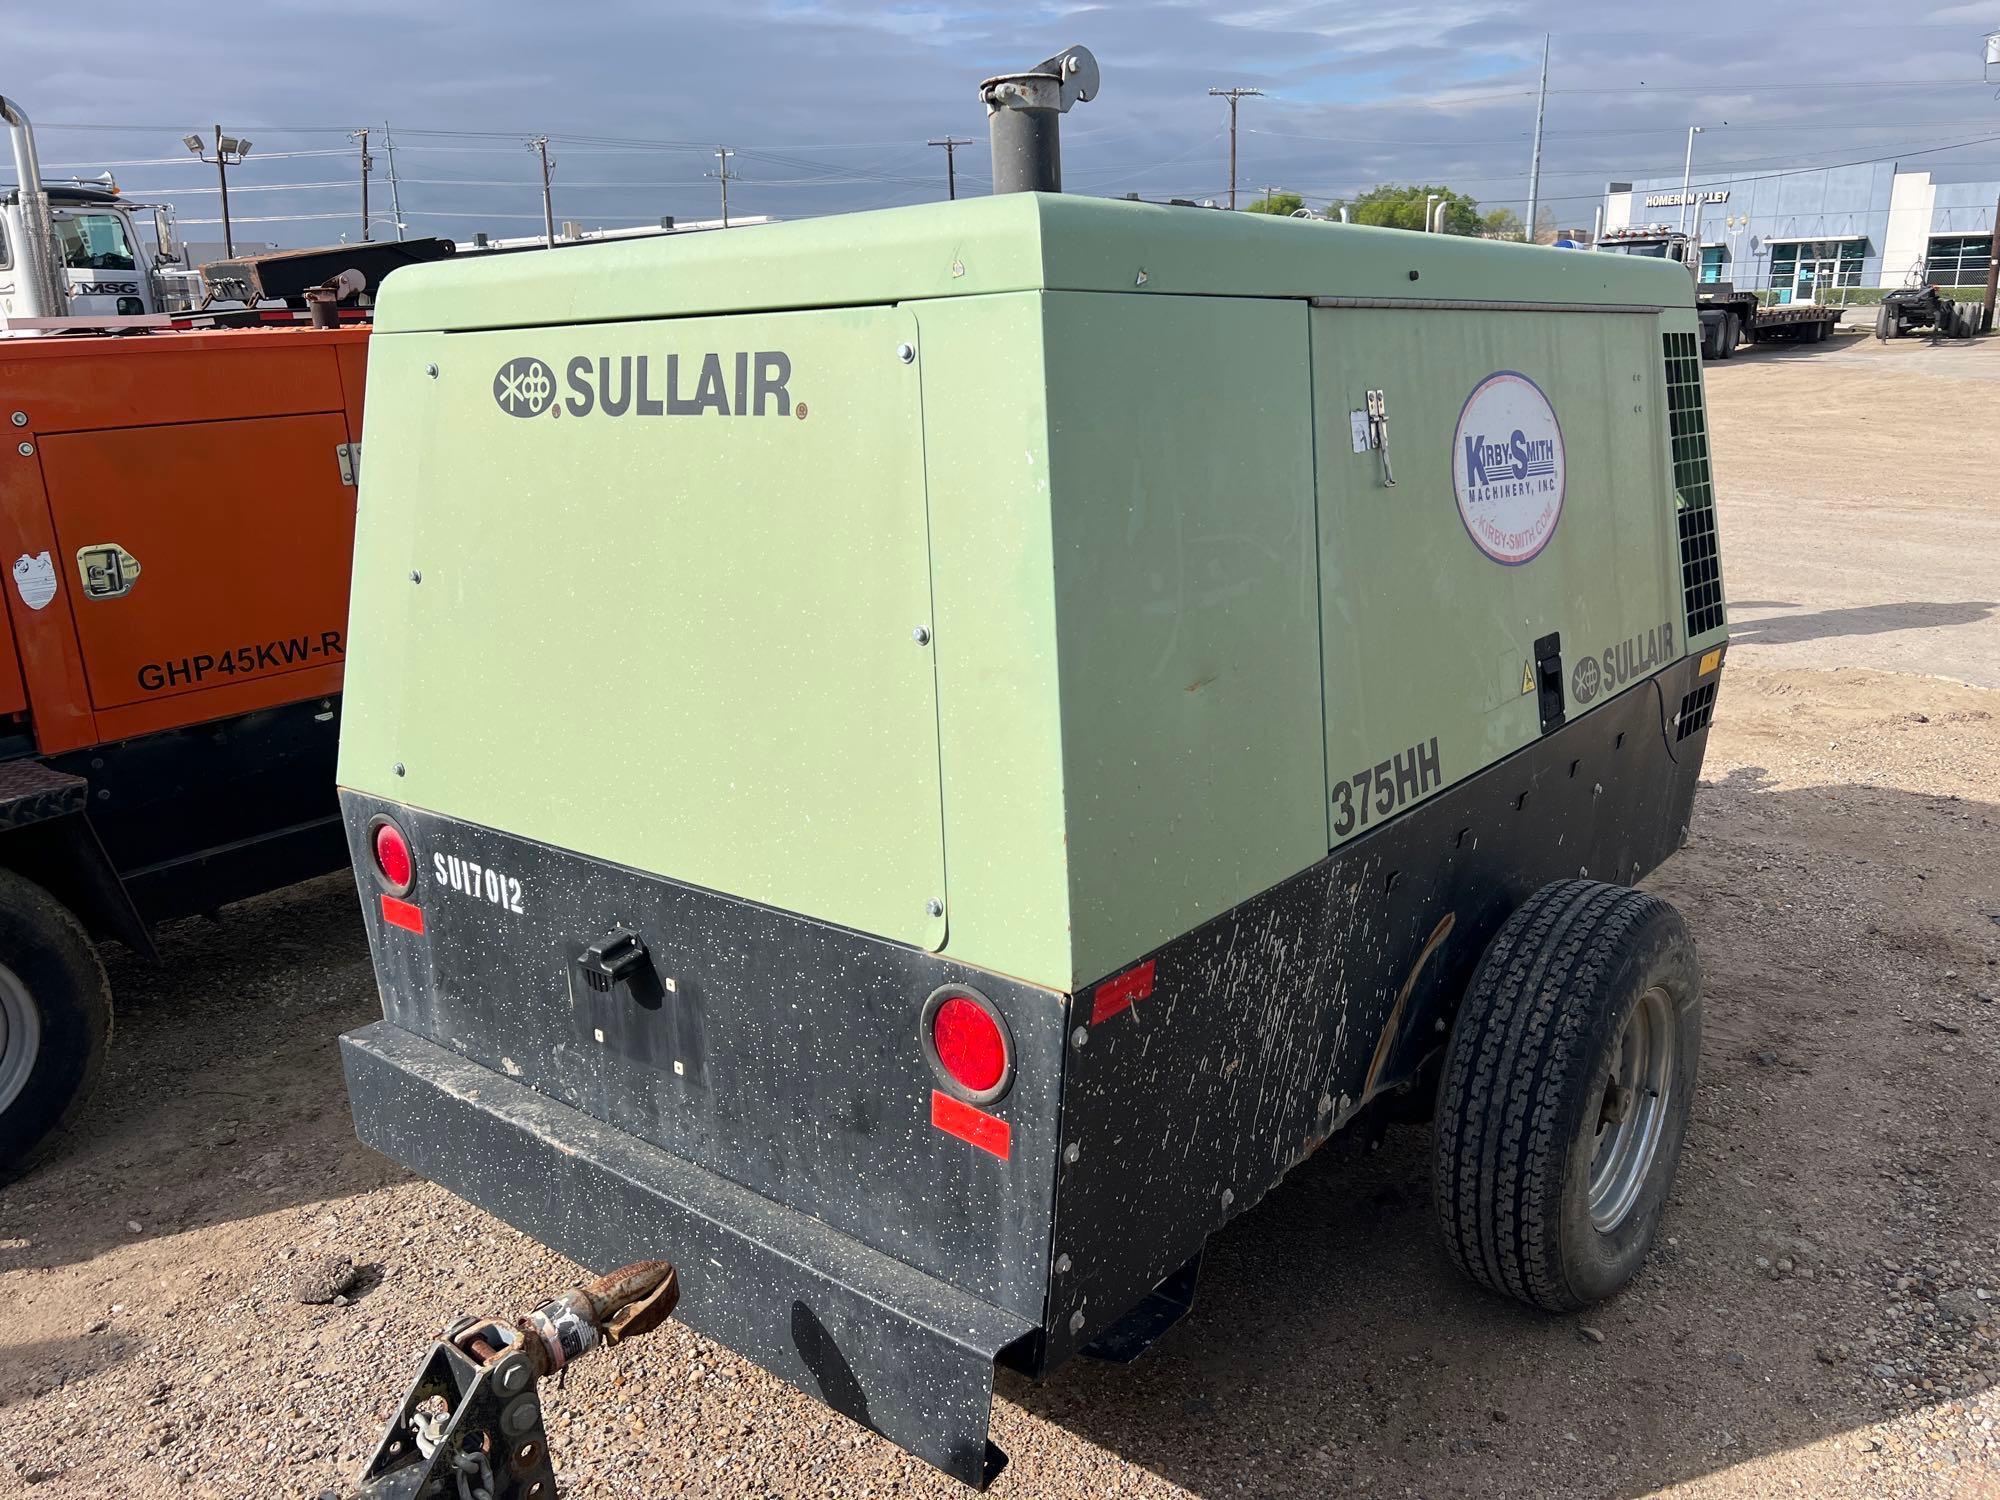 SULLAIR 375HHDP AIR COMPRESSOR SN:201703230039 powered by John Deere diesel engine, equipped with